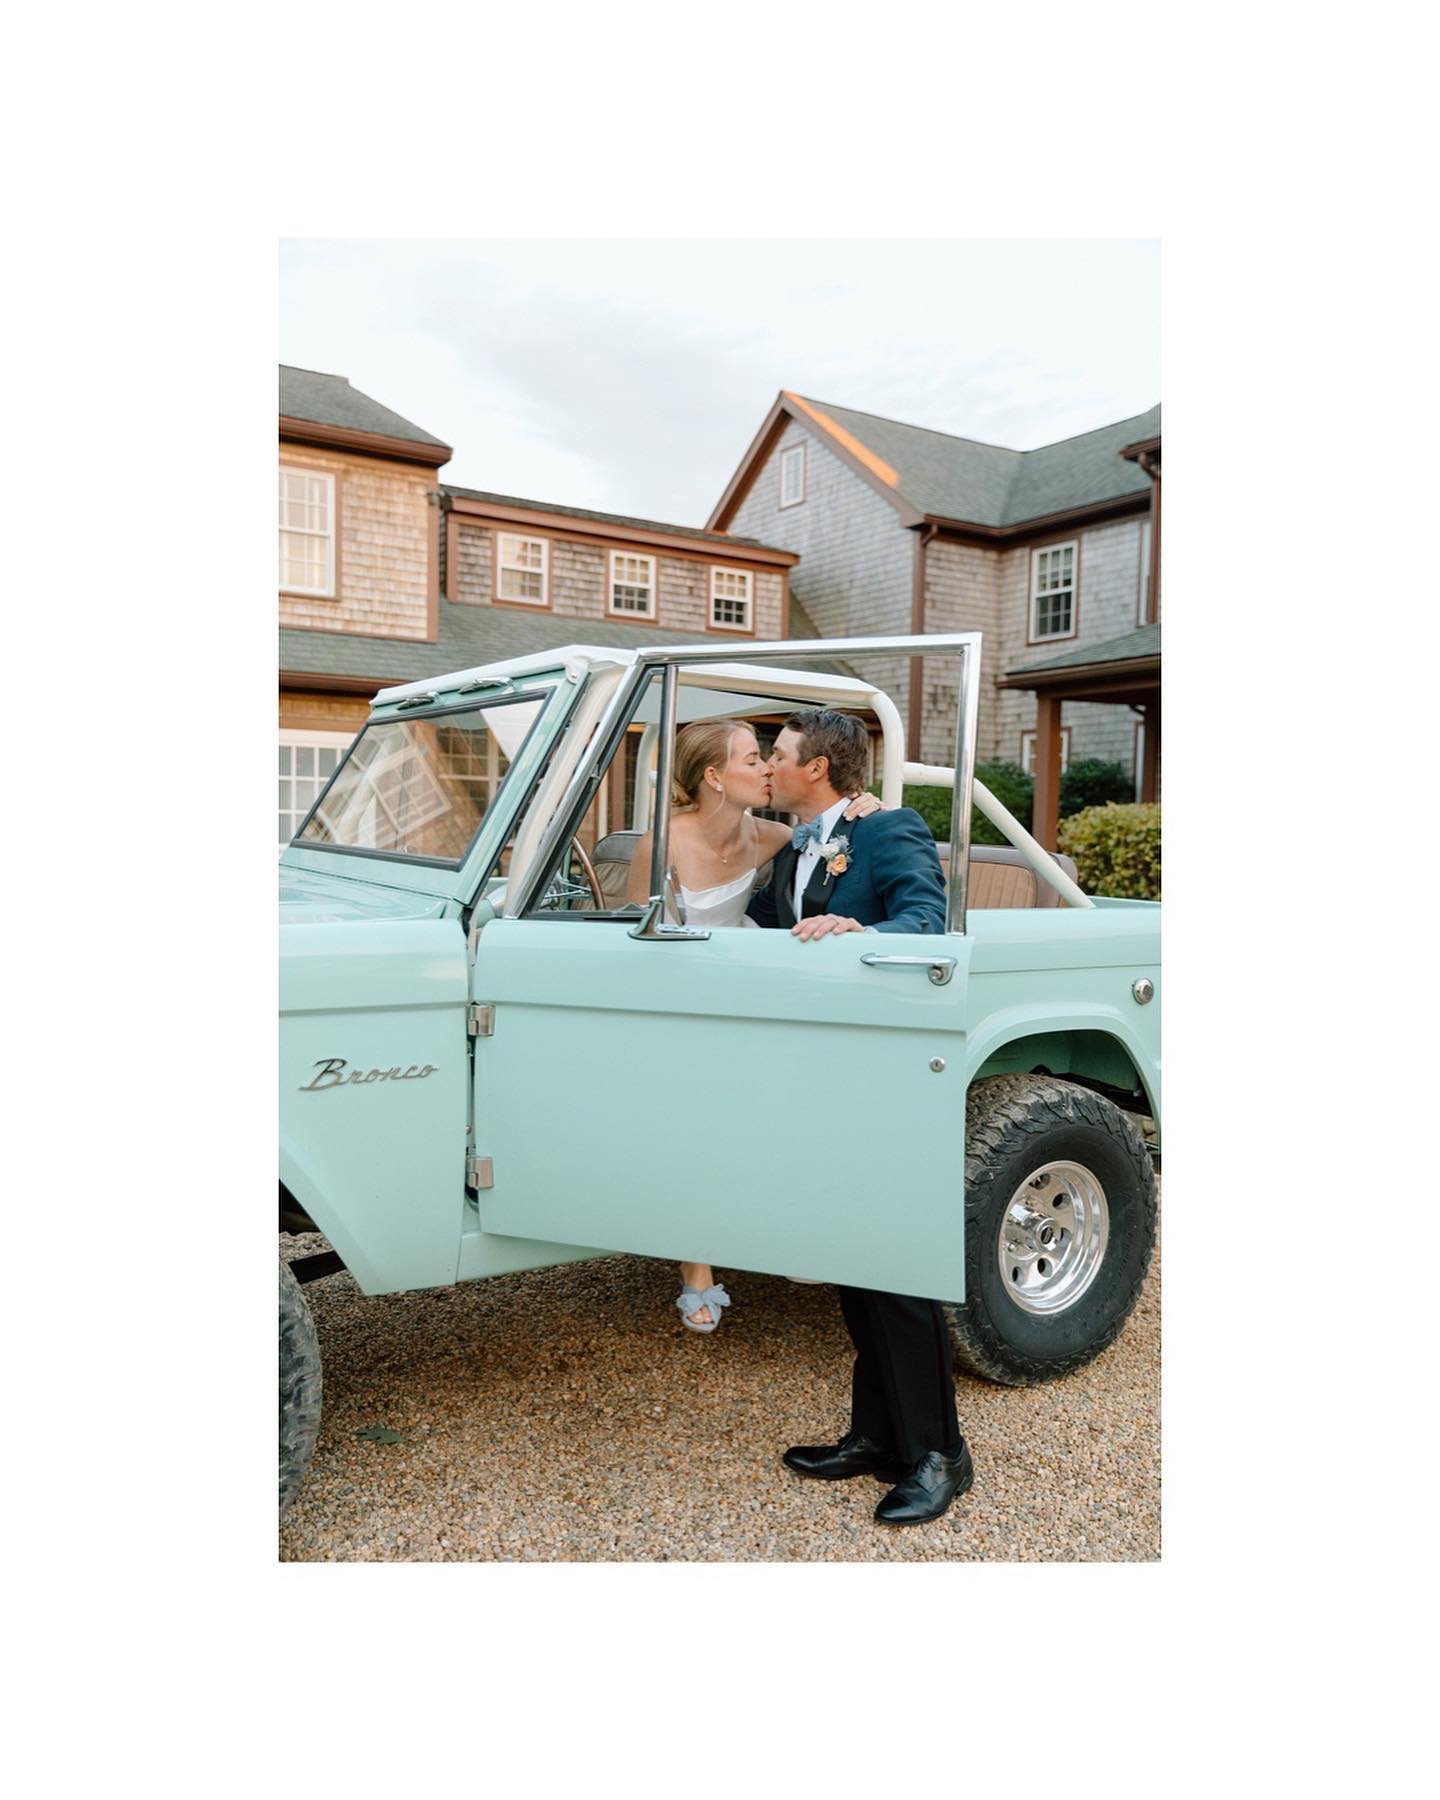 The sweetest Martha&rsquo;s Vineyard backyard wedding is live on the blog. Not only does is feature two of my favorite people EVER but their restored Vintage Bronco too. She&rsquo;s a real cutie. 🥹 LINK IN BIO